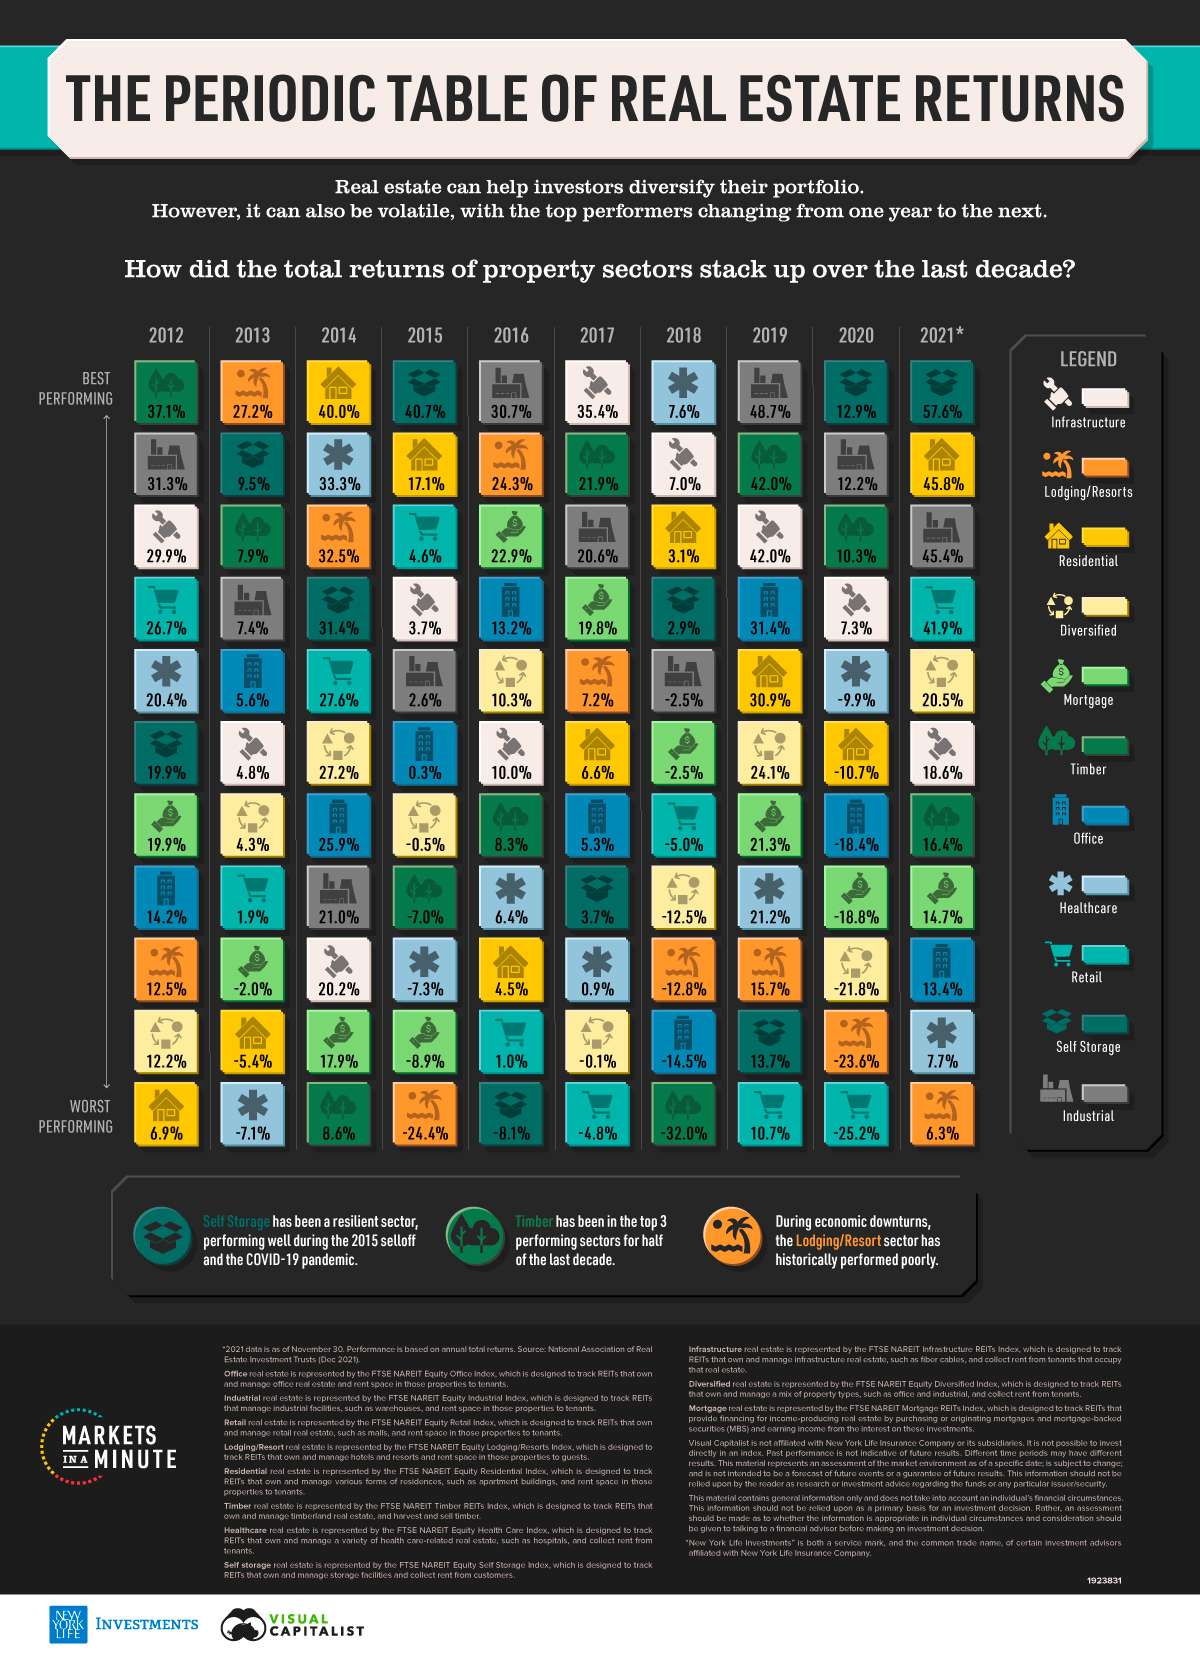 The Periodic Table of Real Estate Returns